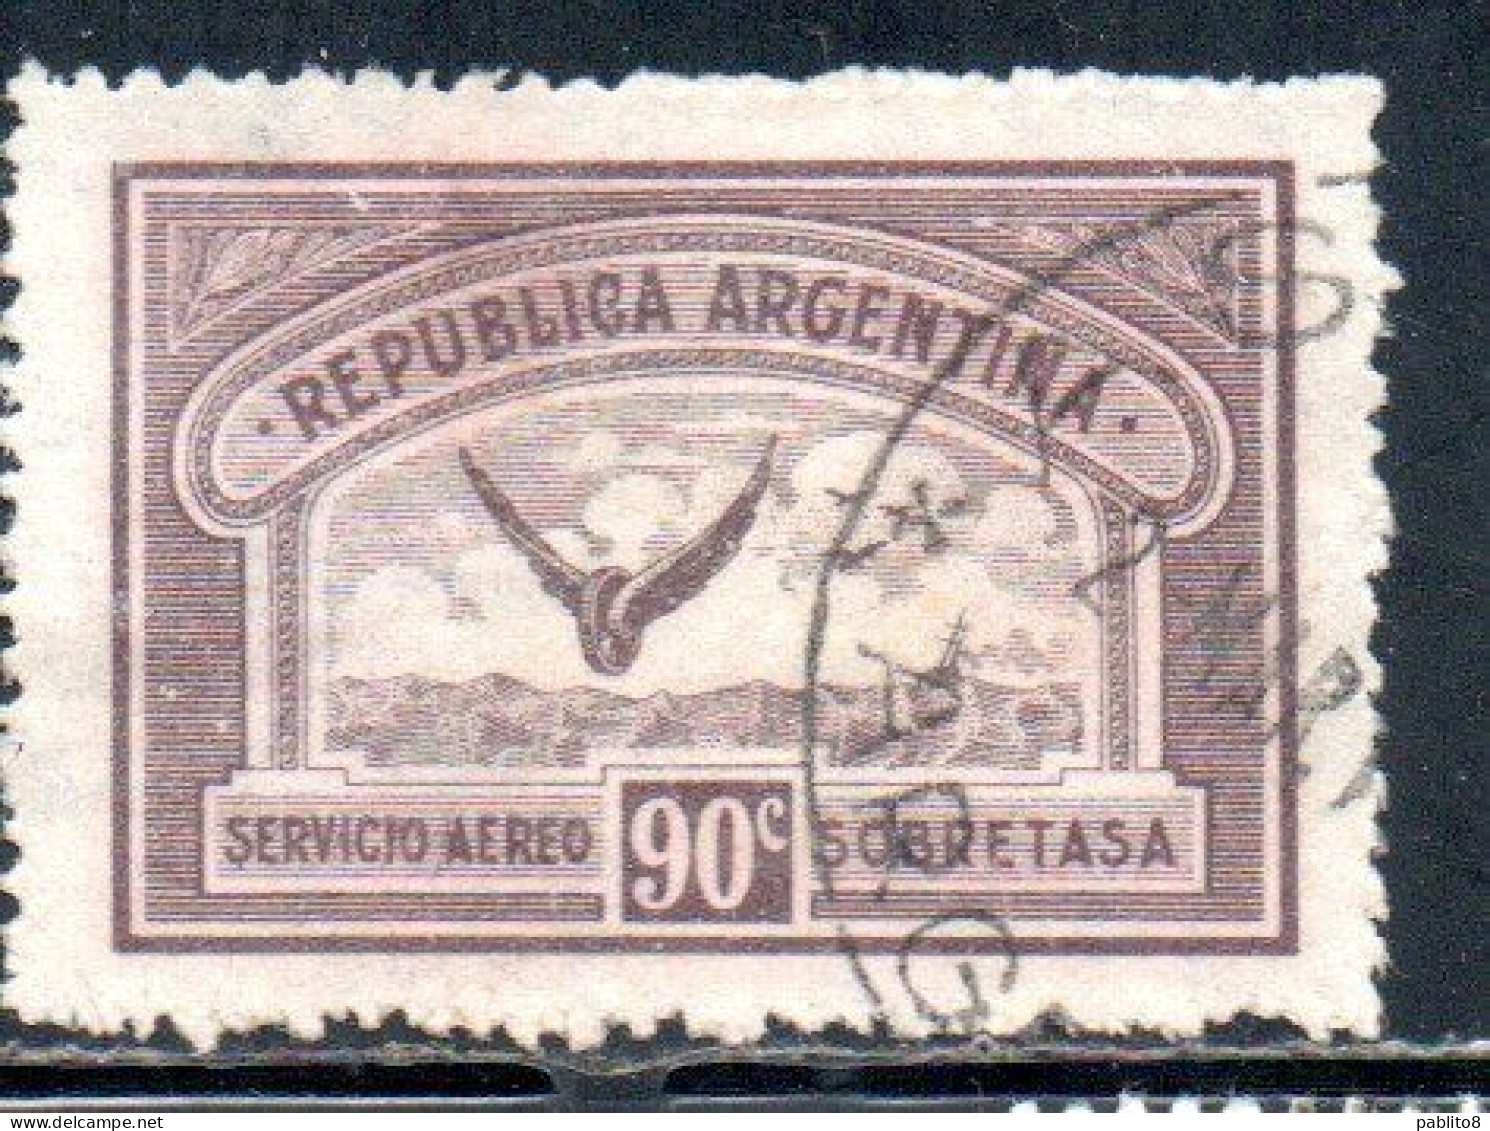 ARGENTINA 1928 AIR POST MAIL CORREO AEREO AIRMAIL WINGS CROSS THE SEA 90c USED USADO OBLITERE' - Luftpost